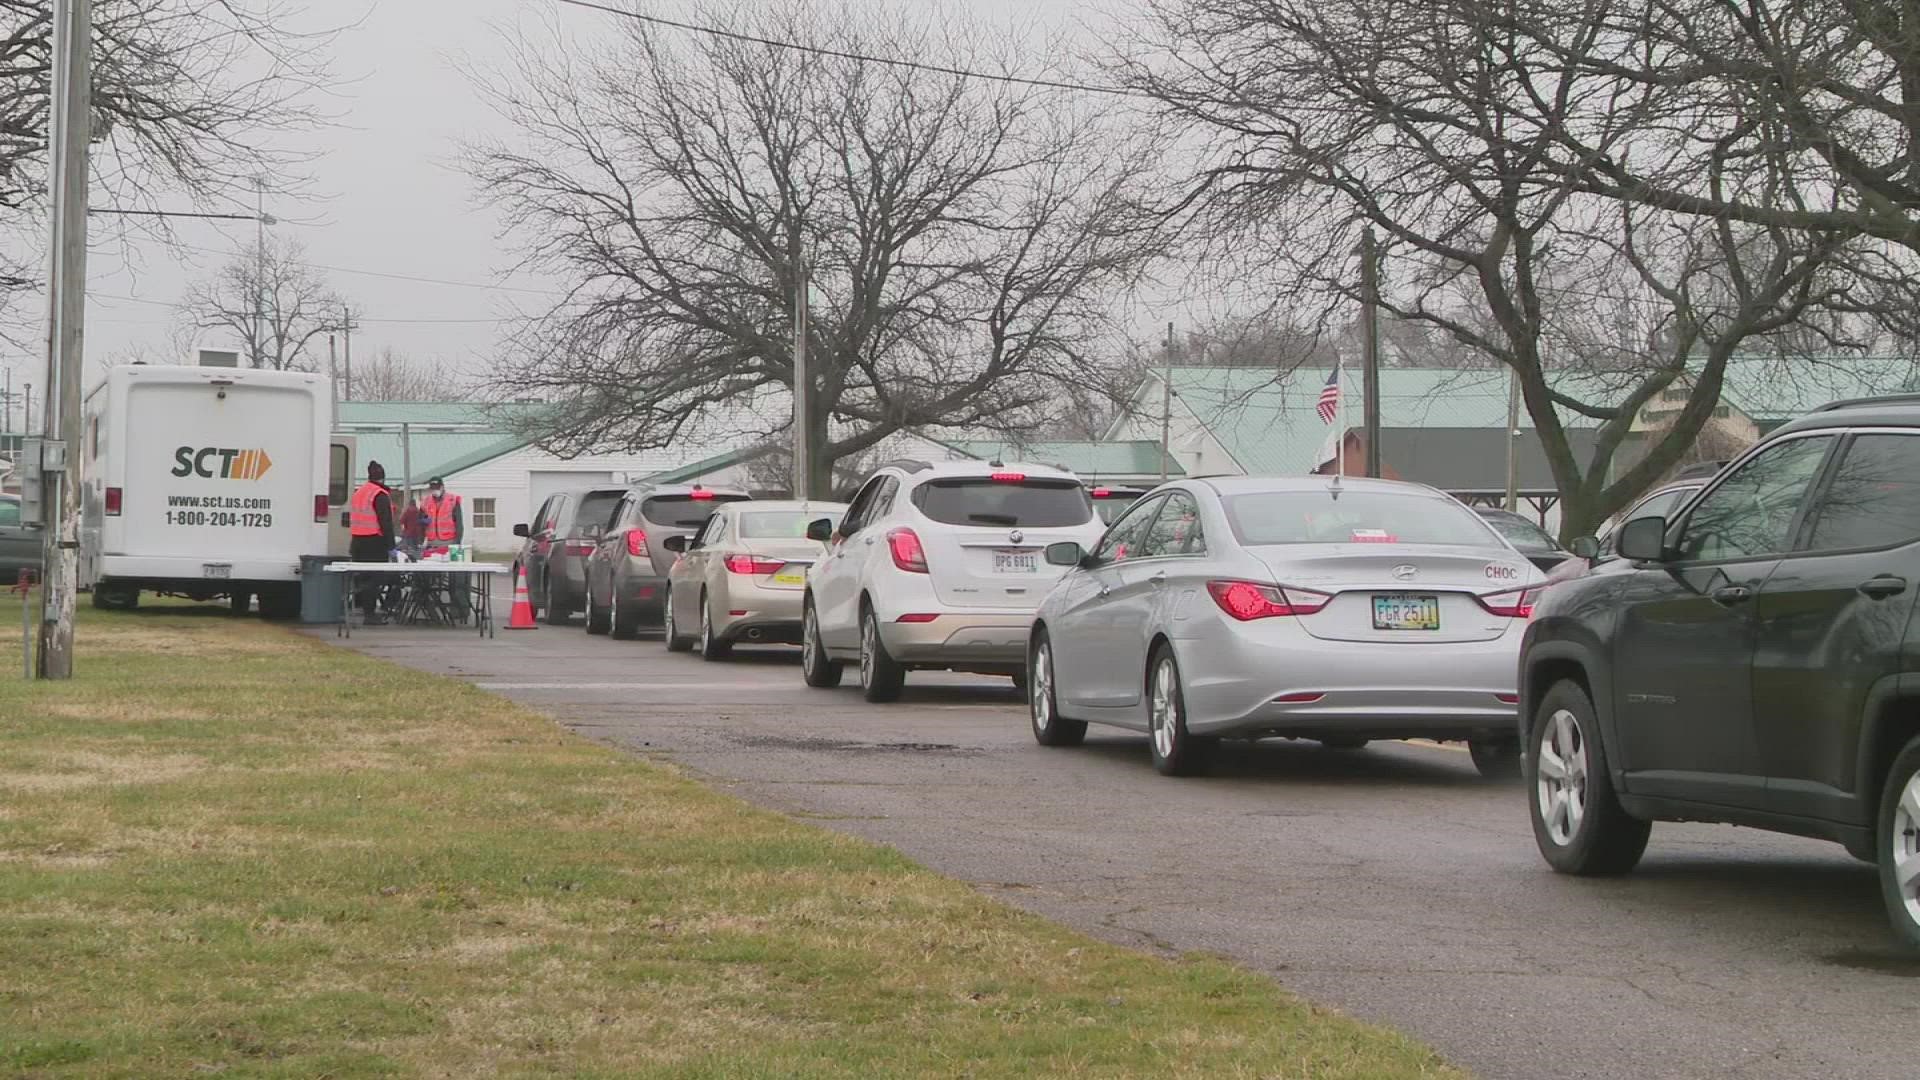 The Lake County General Health District is currently holding a drive-thru testing site, offering rapid antigen tests at the Lake County Fairgrounds.